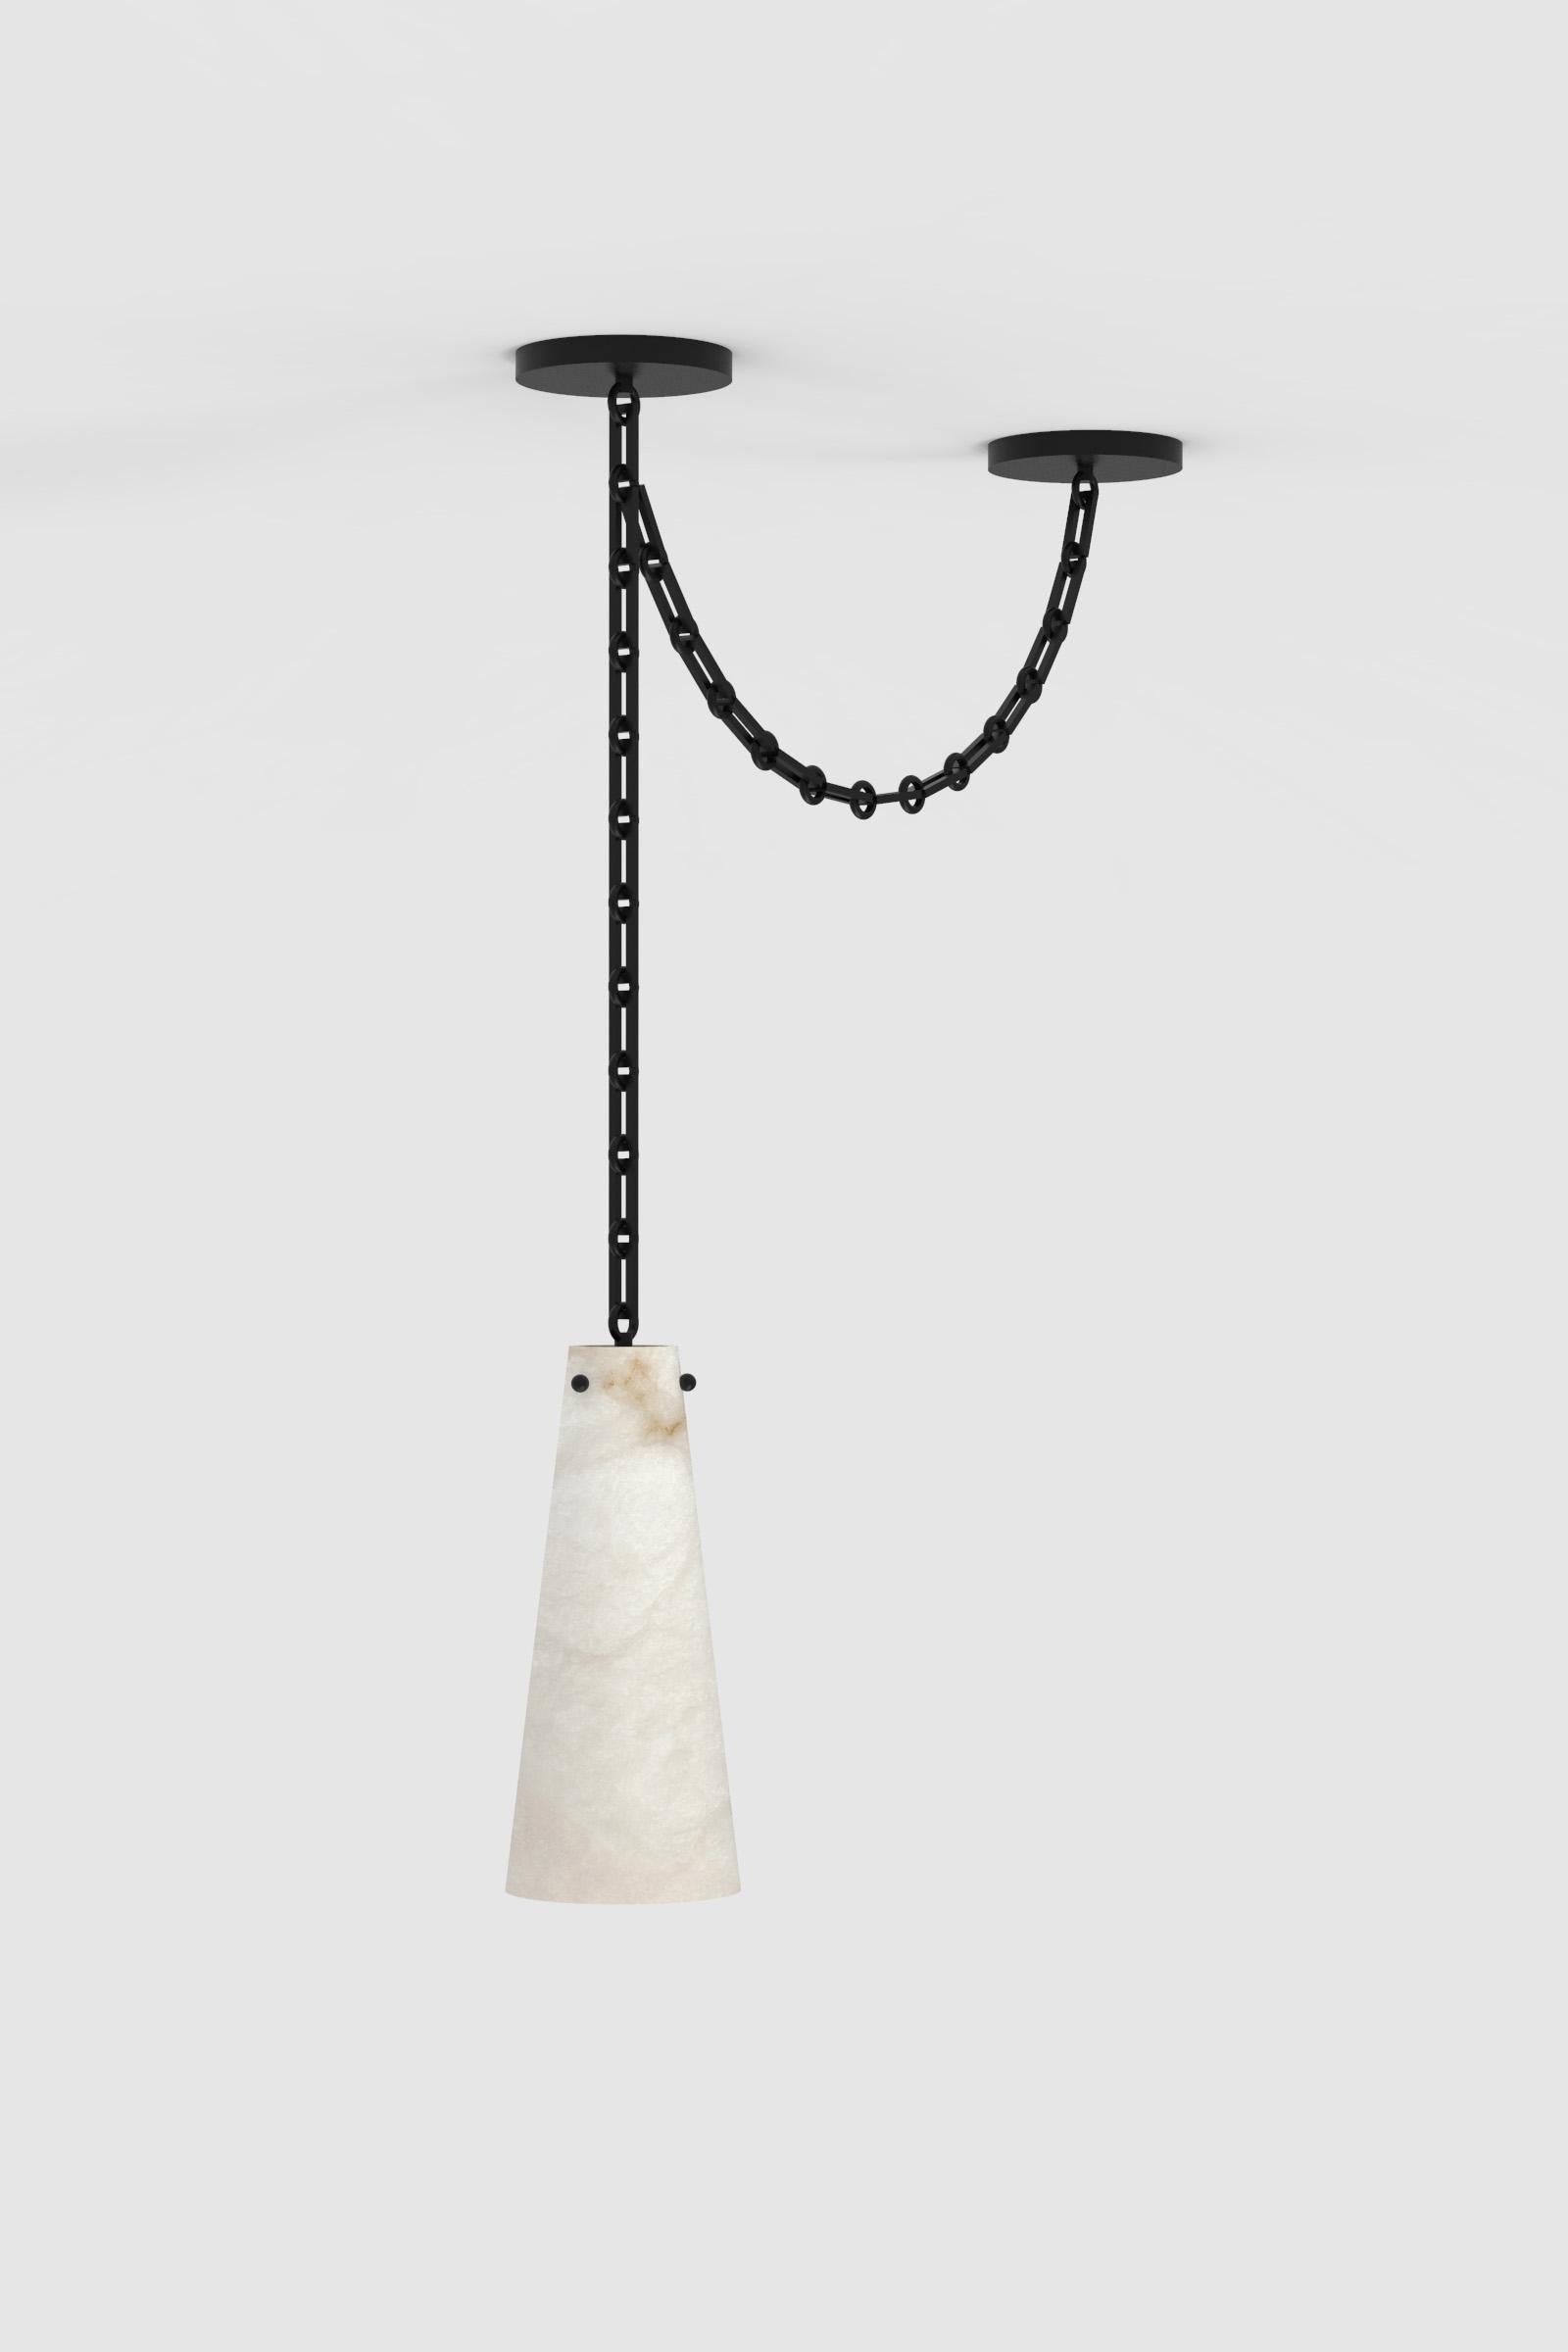 Orphan Work 202A-1S Pendant BLK, 2021
Shown in alabaster with blackened brass
Available in brushed brass and blackened brass
Measures: 15” H x 6 1/2” W 
Height and width to order*
Canopy 6